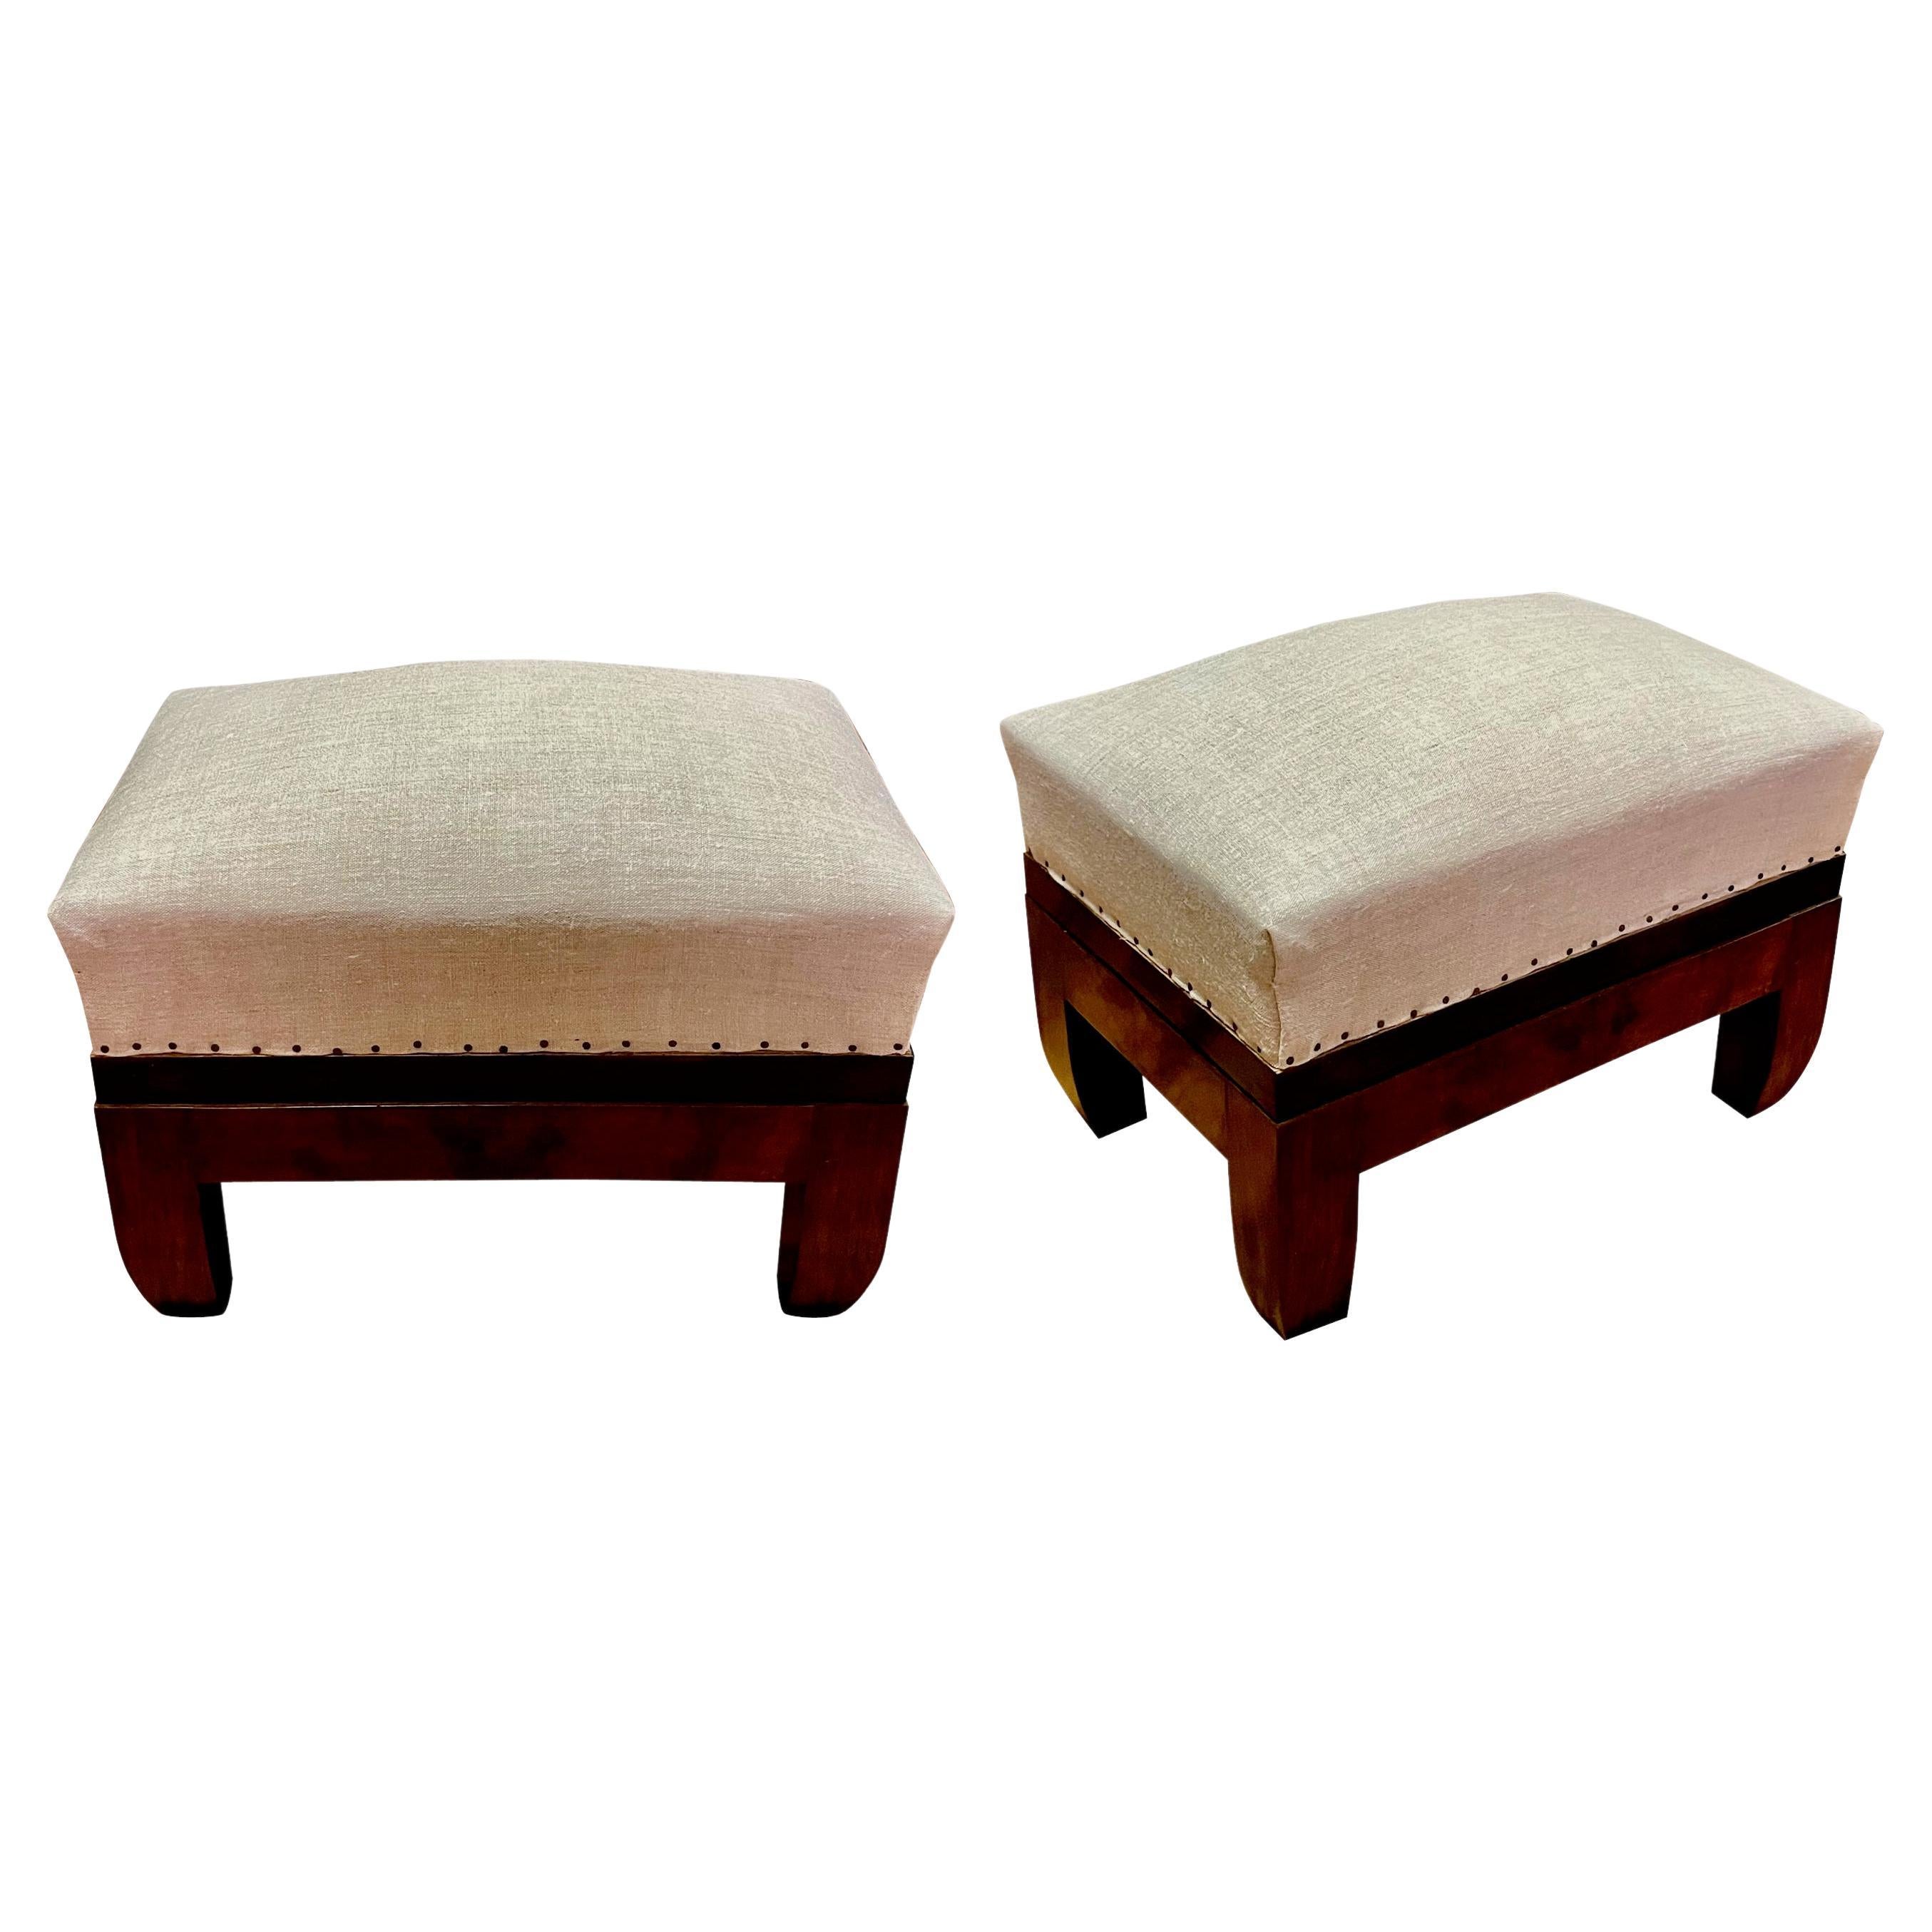 Walnut Framed Upholstered Footstools, Italy, 19th Century For Sale